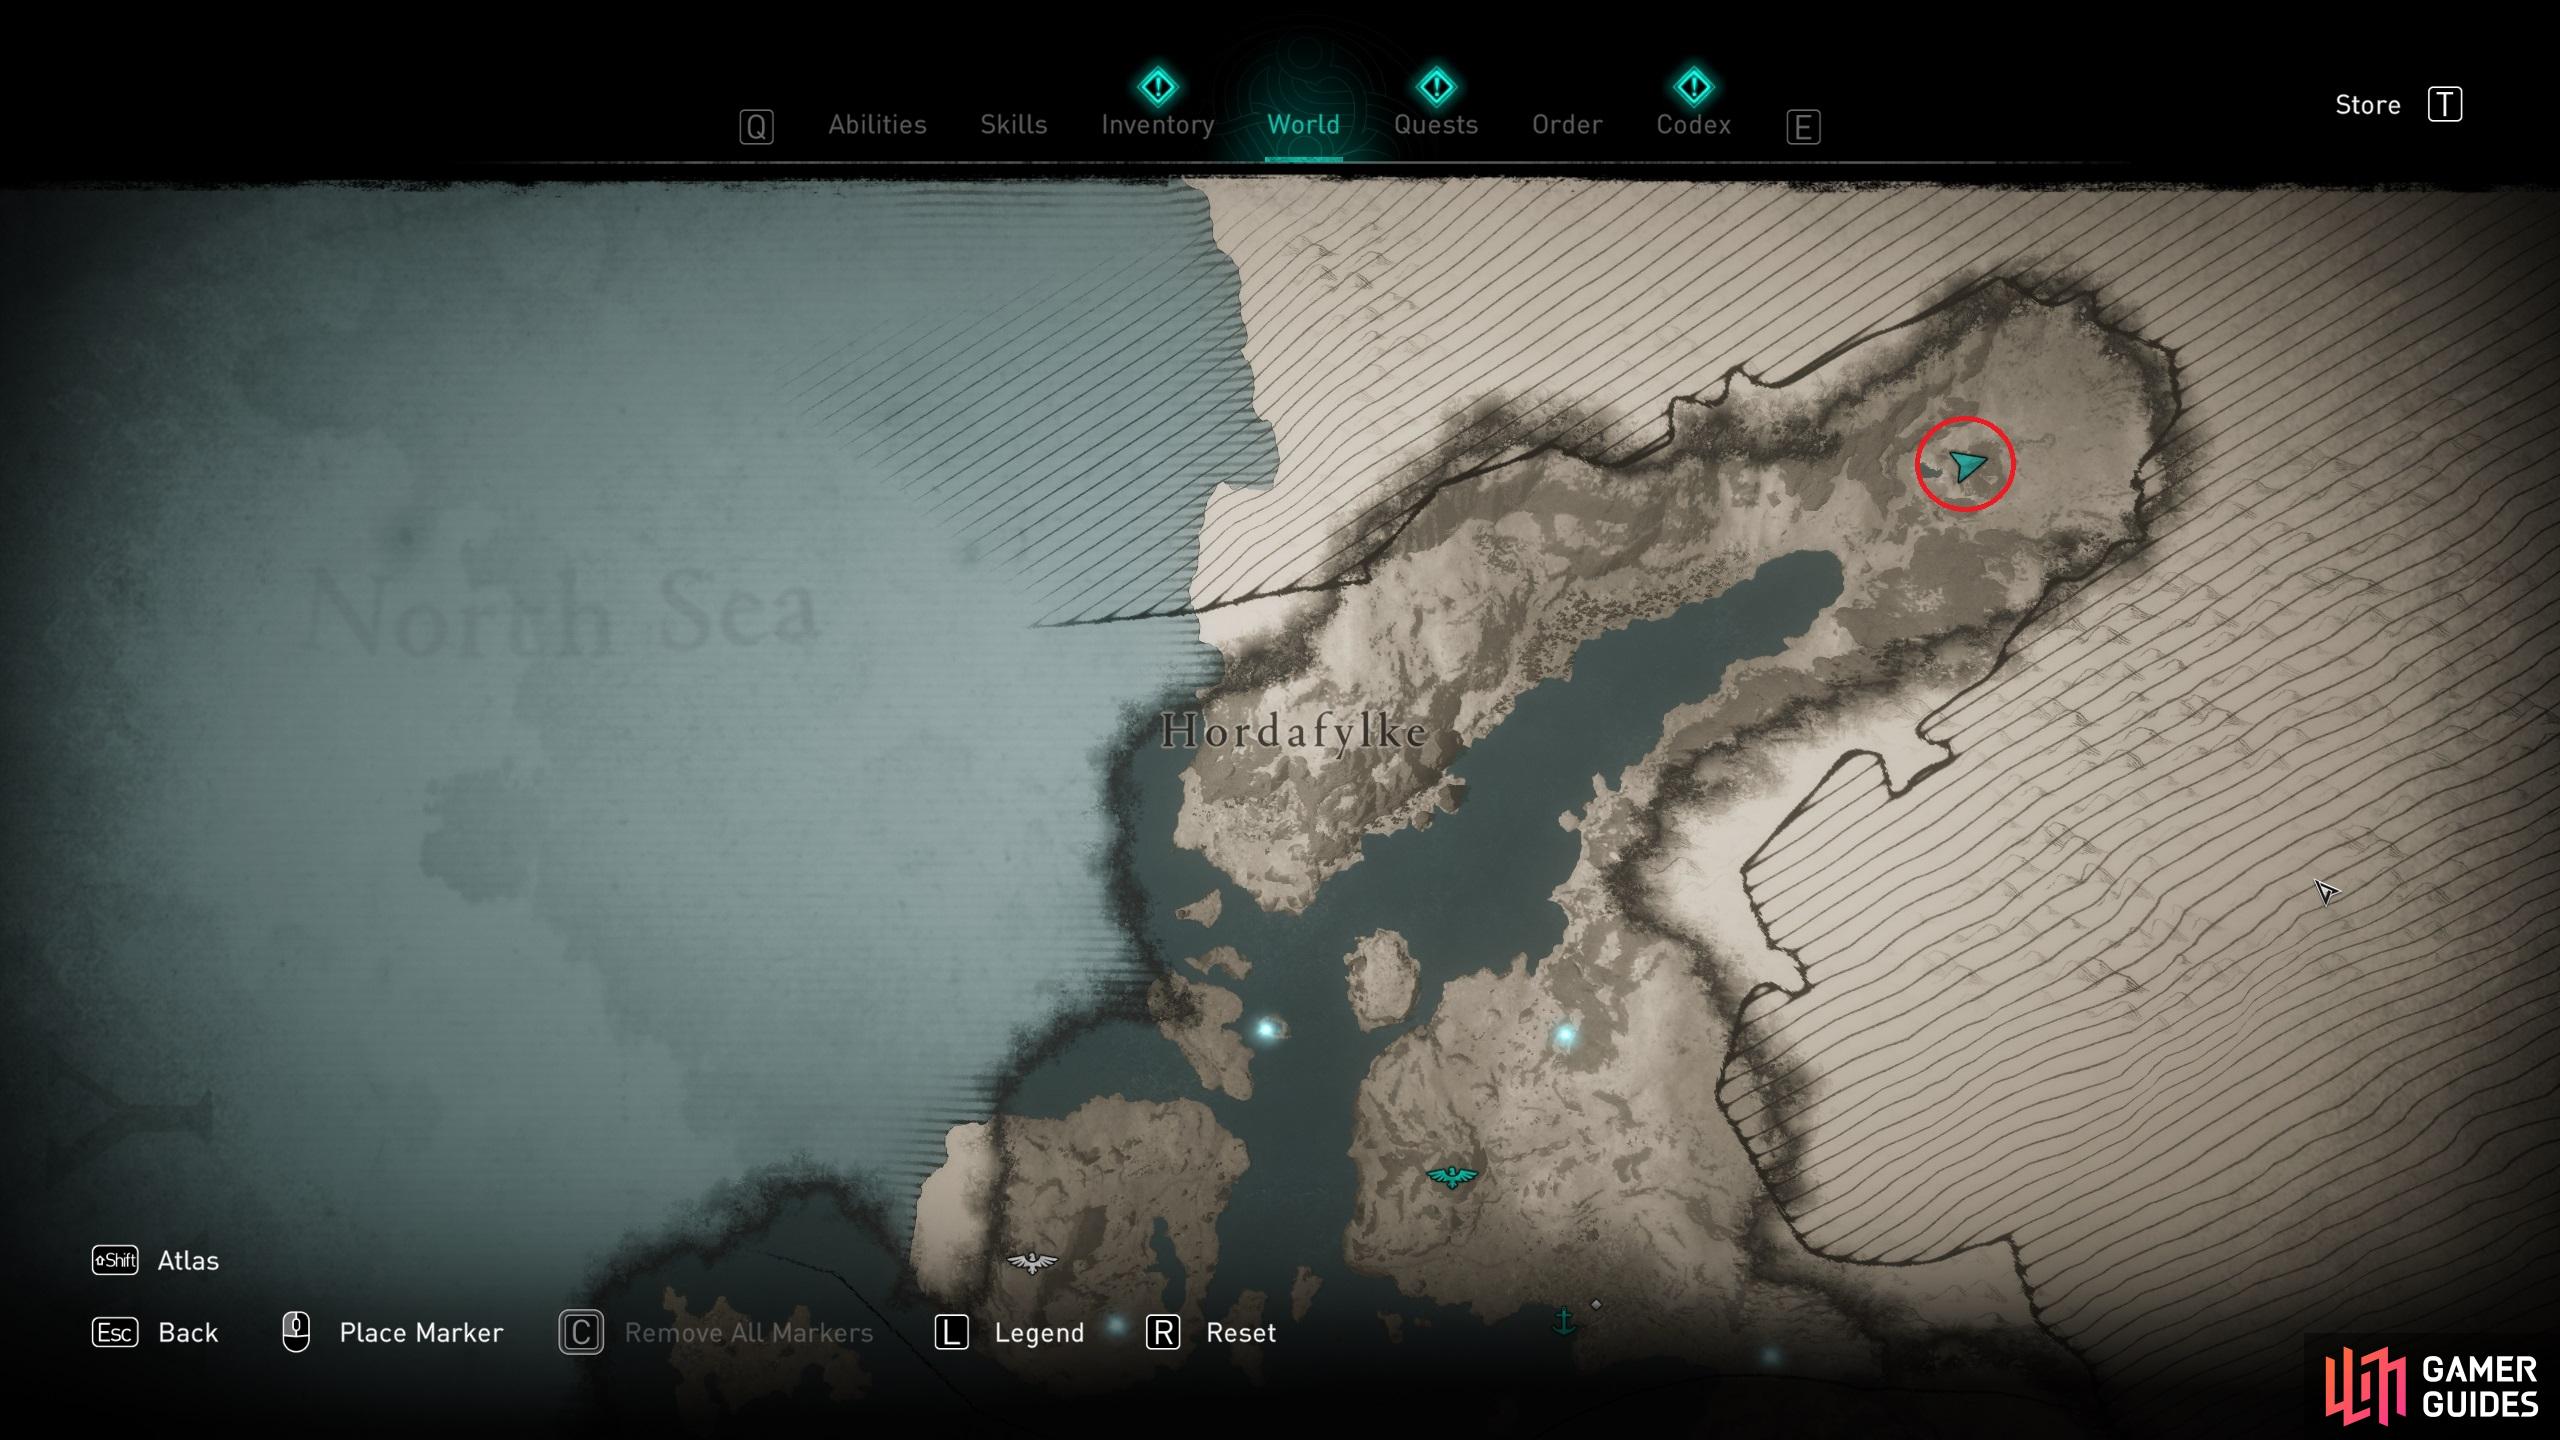 The location of Goinnhellir, the cave in the northeast of Hordafylke where Odin's Spear, Gungnir, can be found.